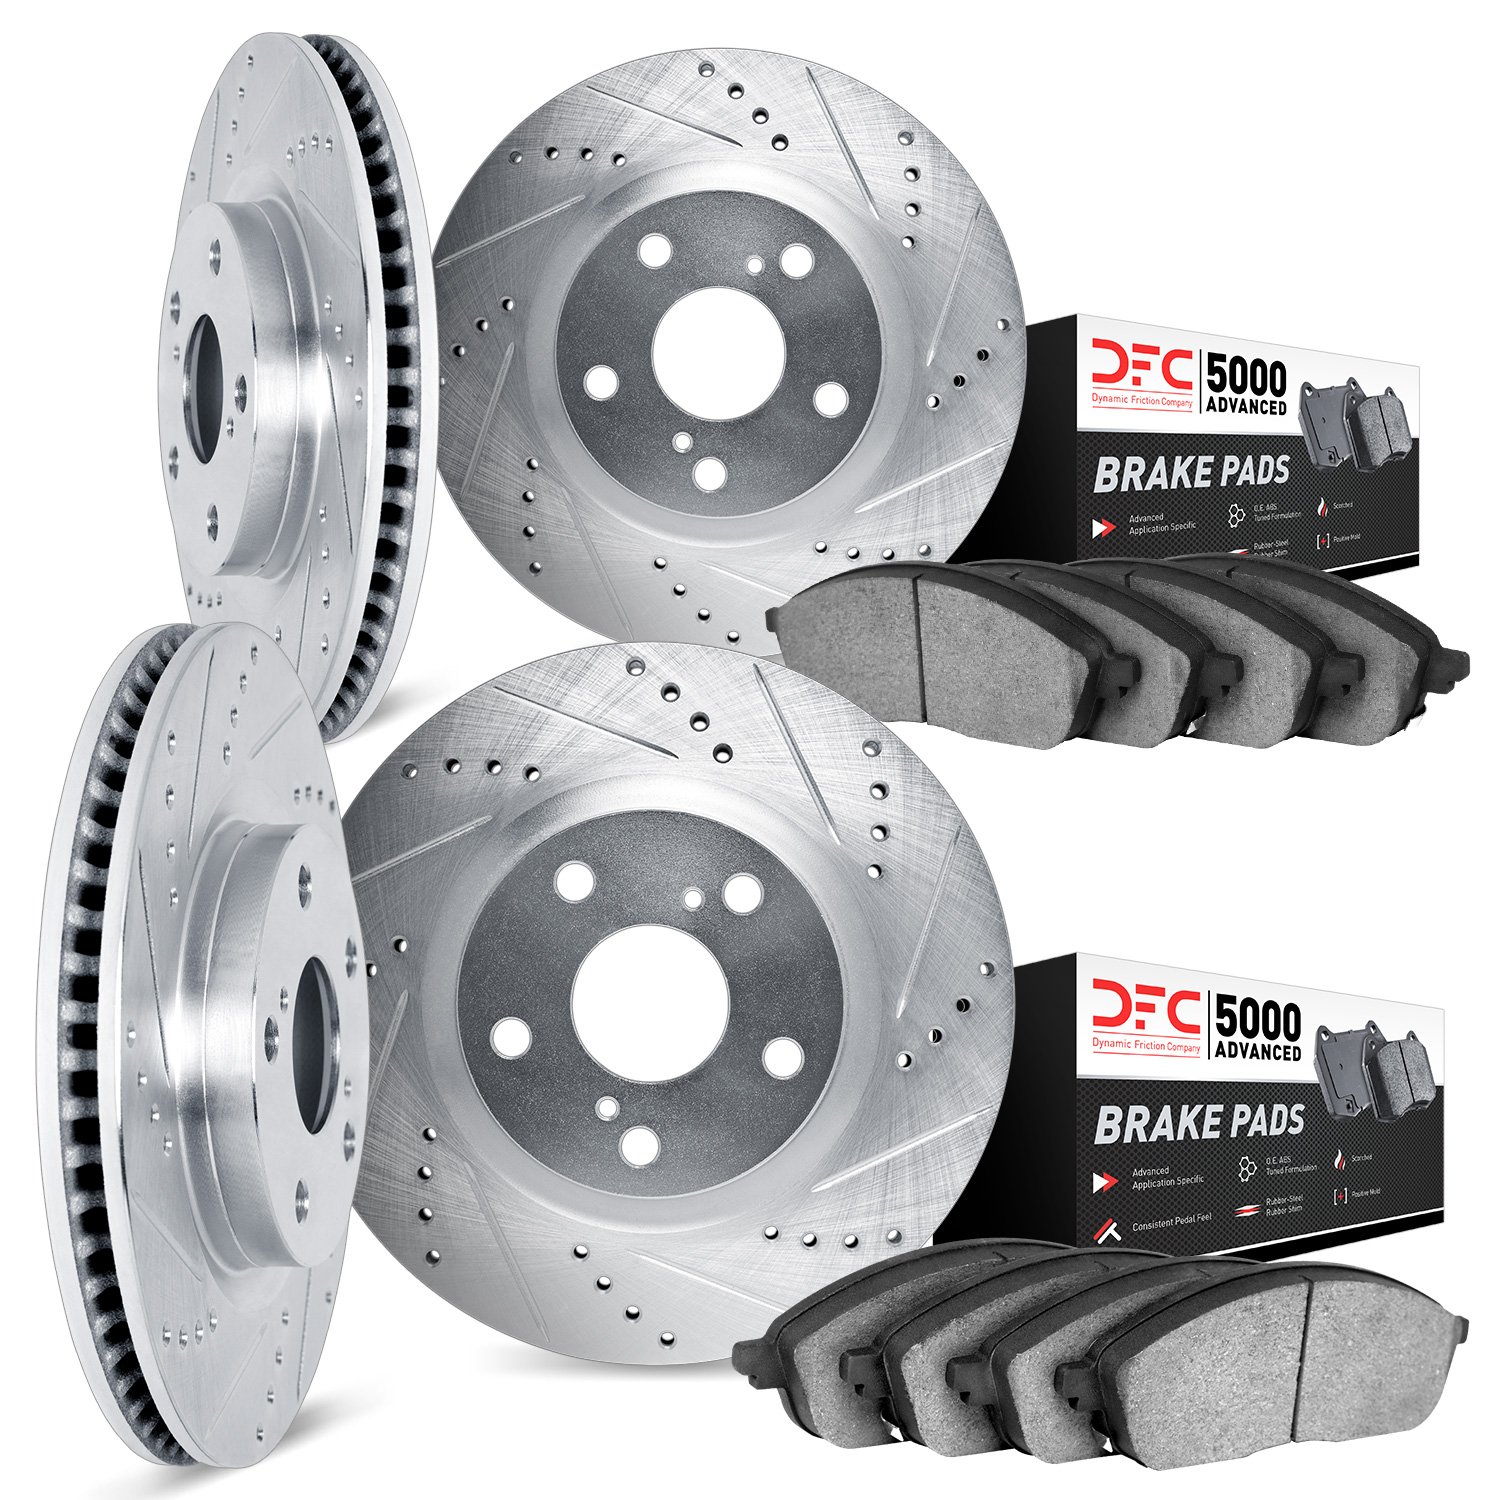 7504-54399 Drilled/Slotted Brake Rotors w/5000 Advanced Brake Pads Kit [Silver], 2013-2016 Ford/Lincoln/Mercury/Mazda, Position: